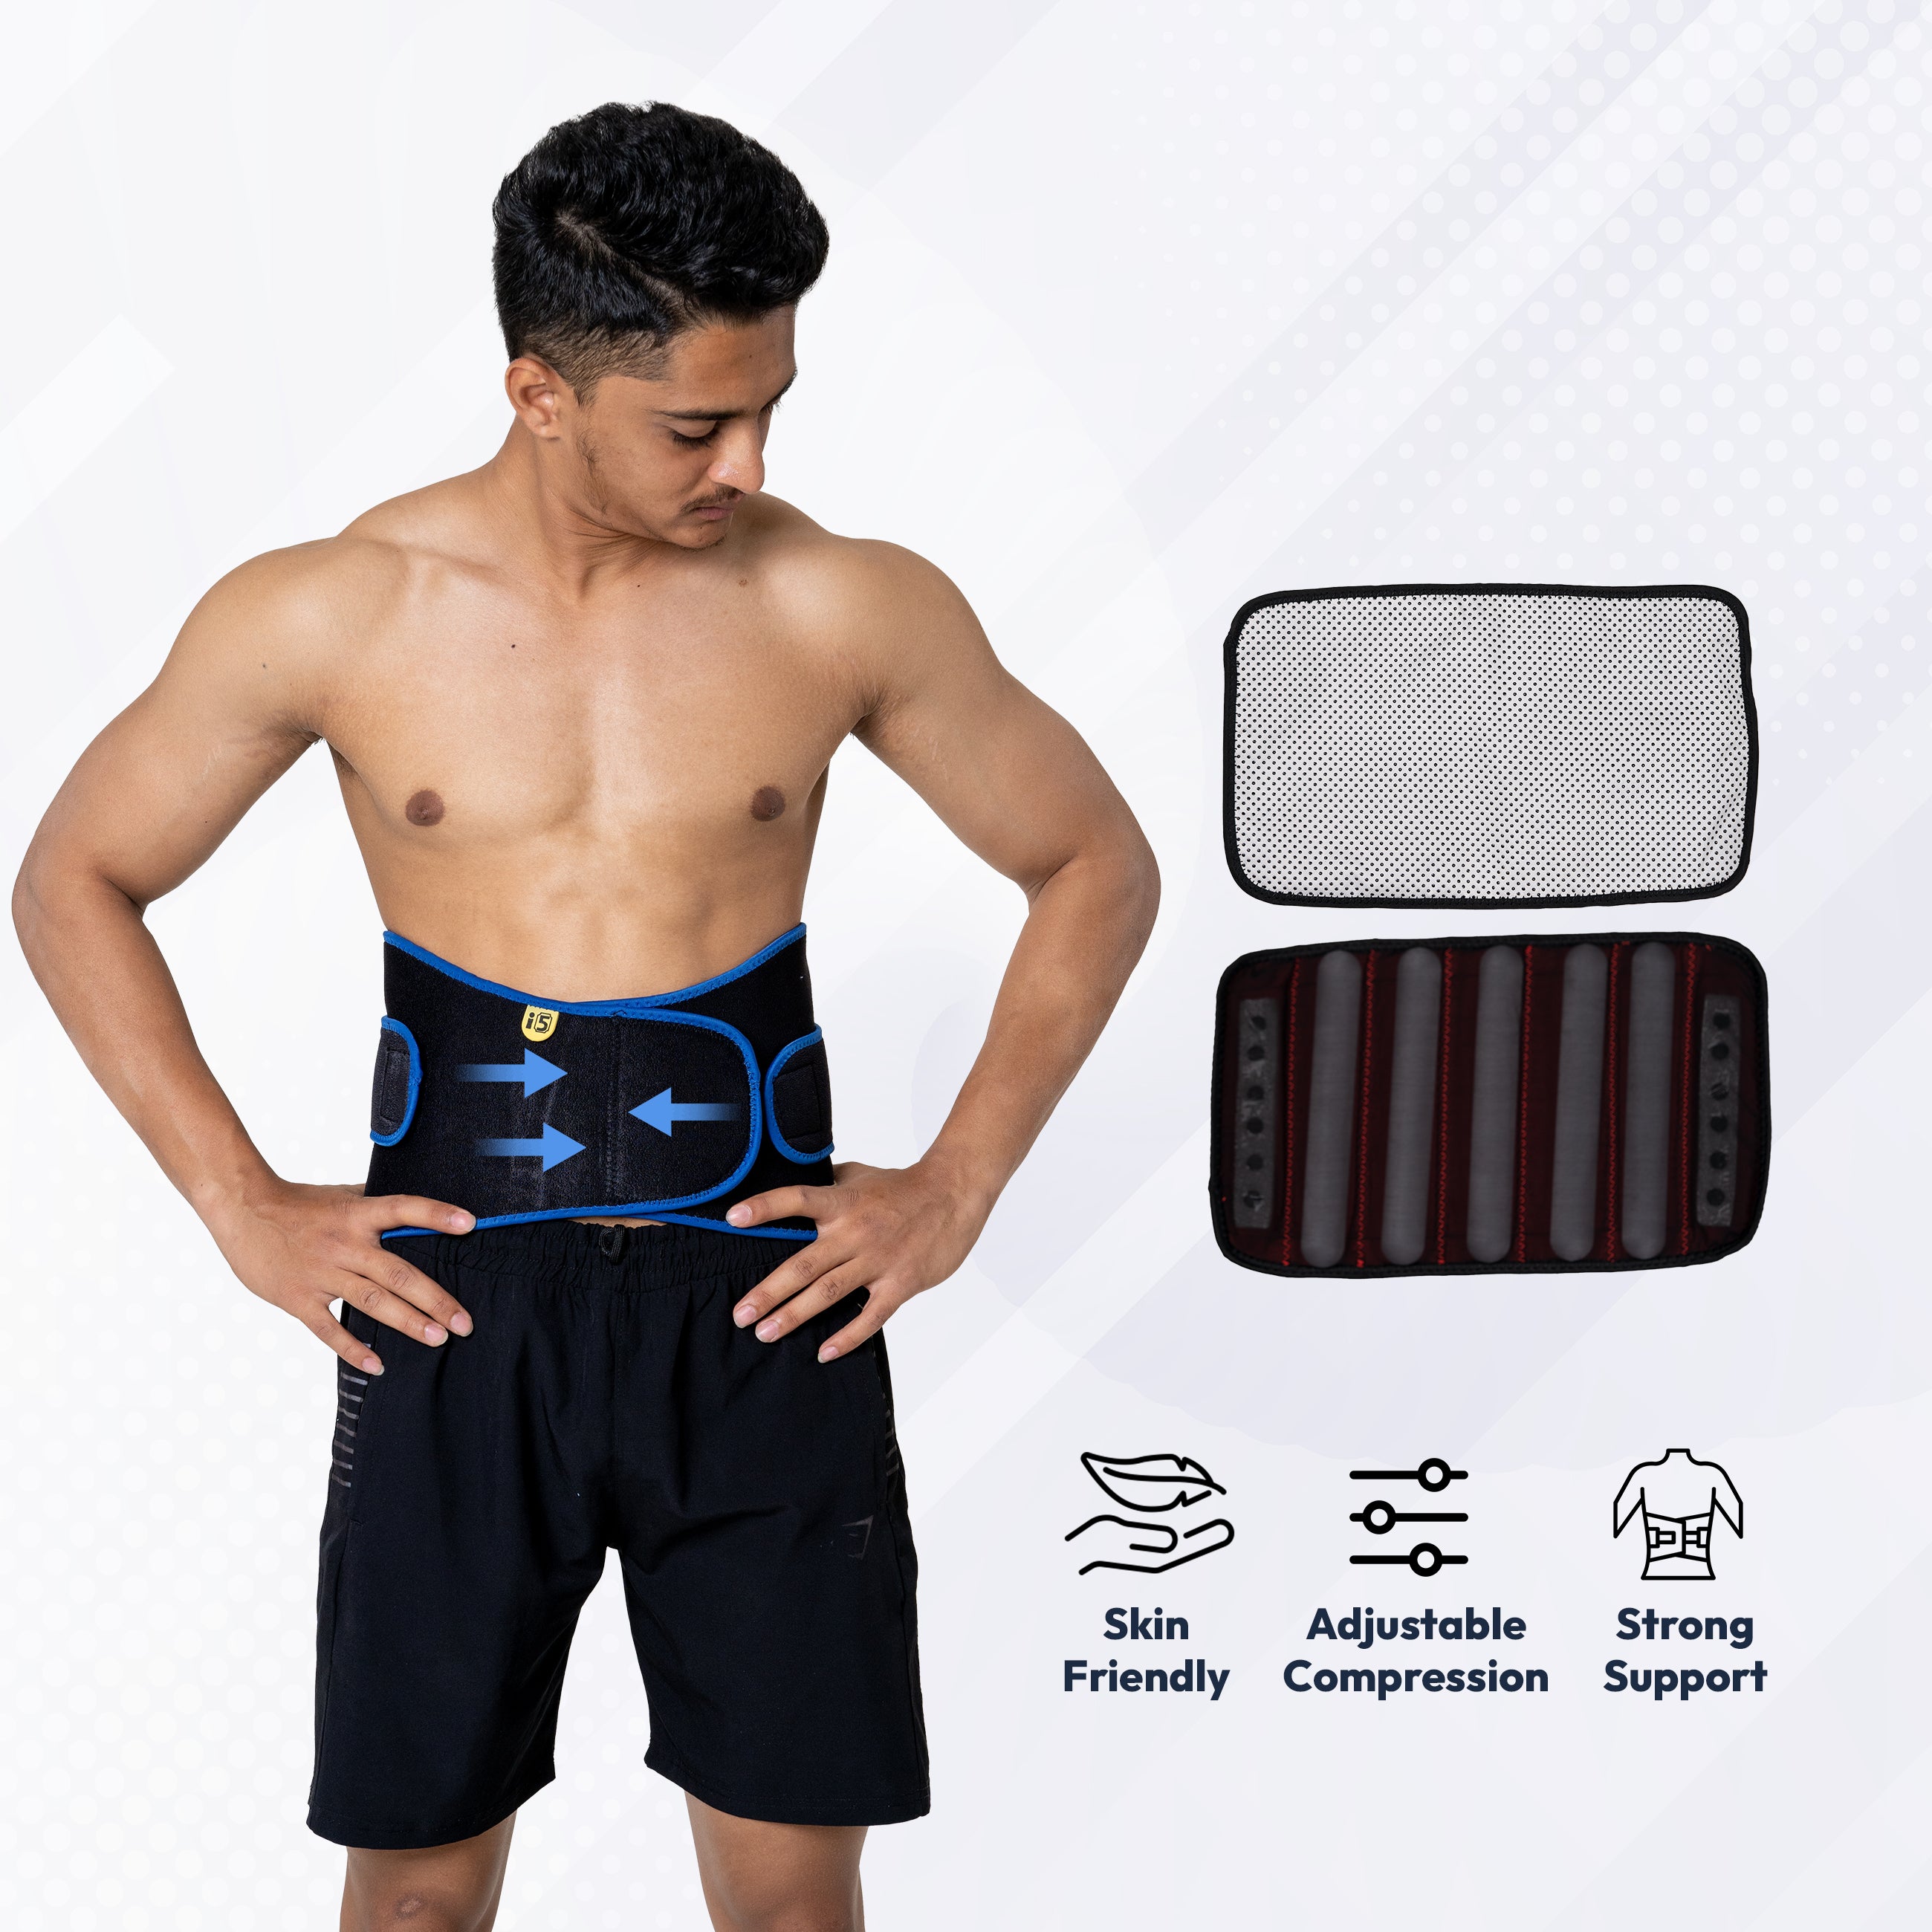 I5Joints-Infrared Lower Back Support(I5Joints Comfort Belt for Lower Back Pain Relief, for Better Posture and Pain Relief and Added Gel Padding for Comfort)